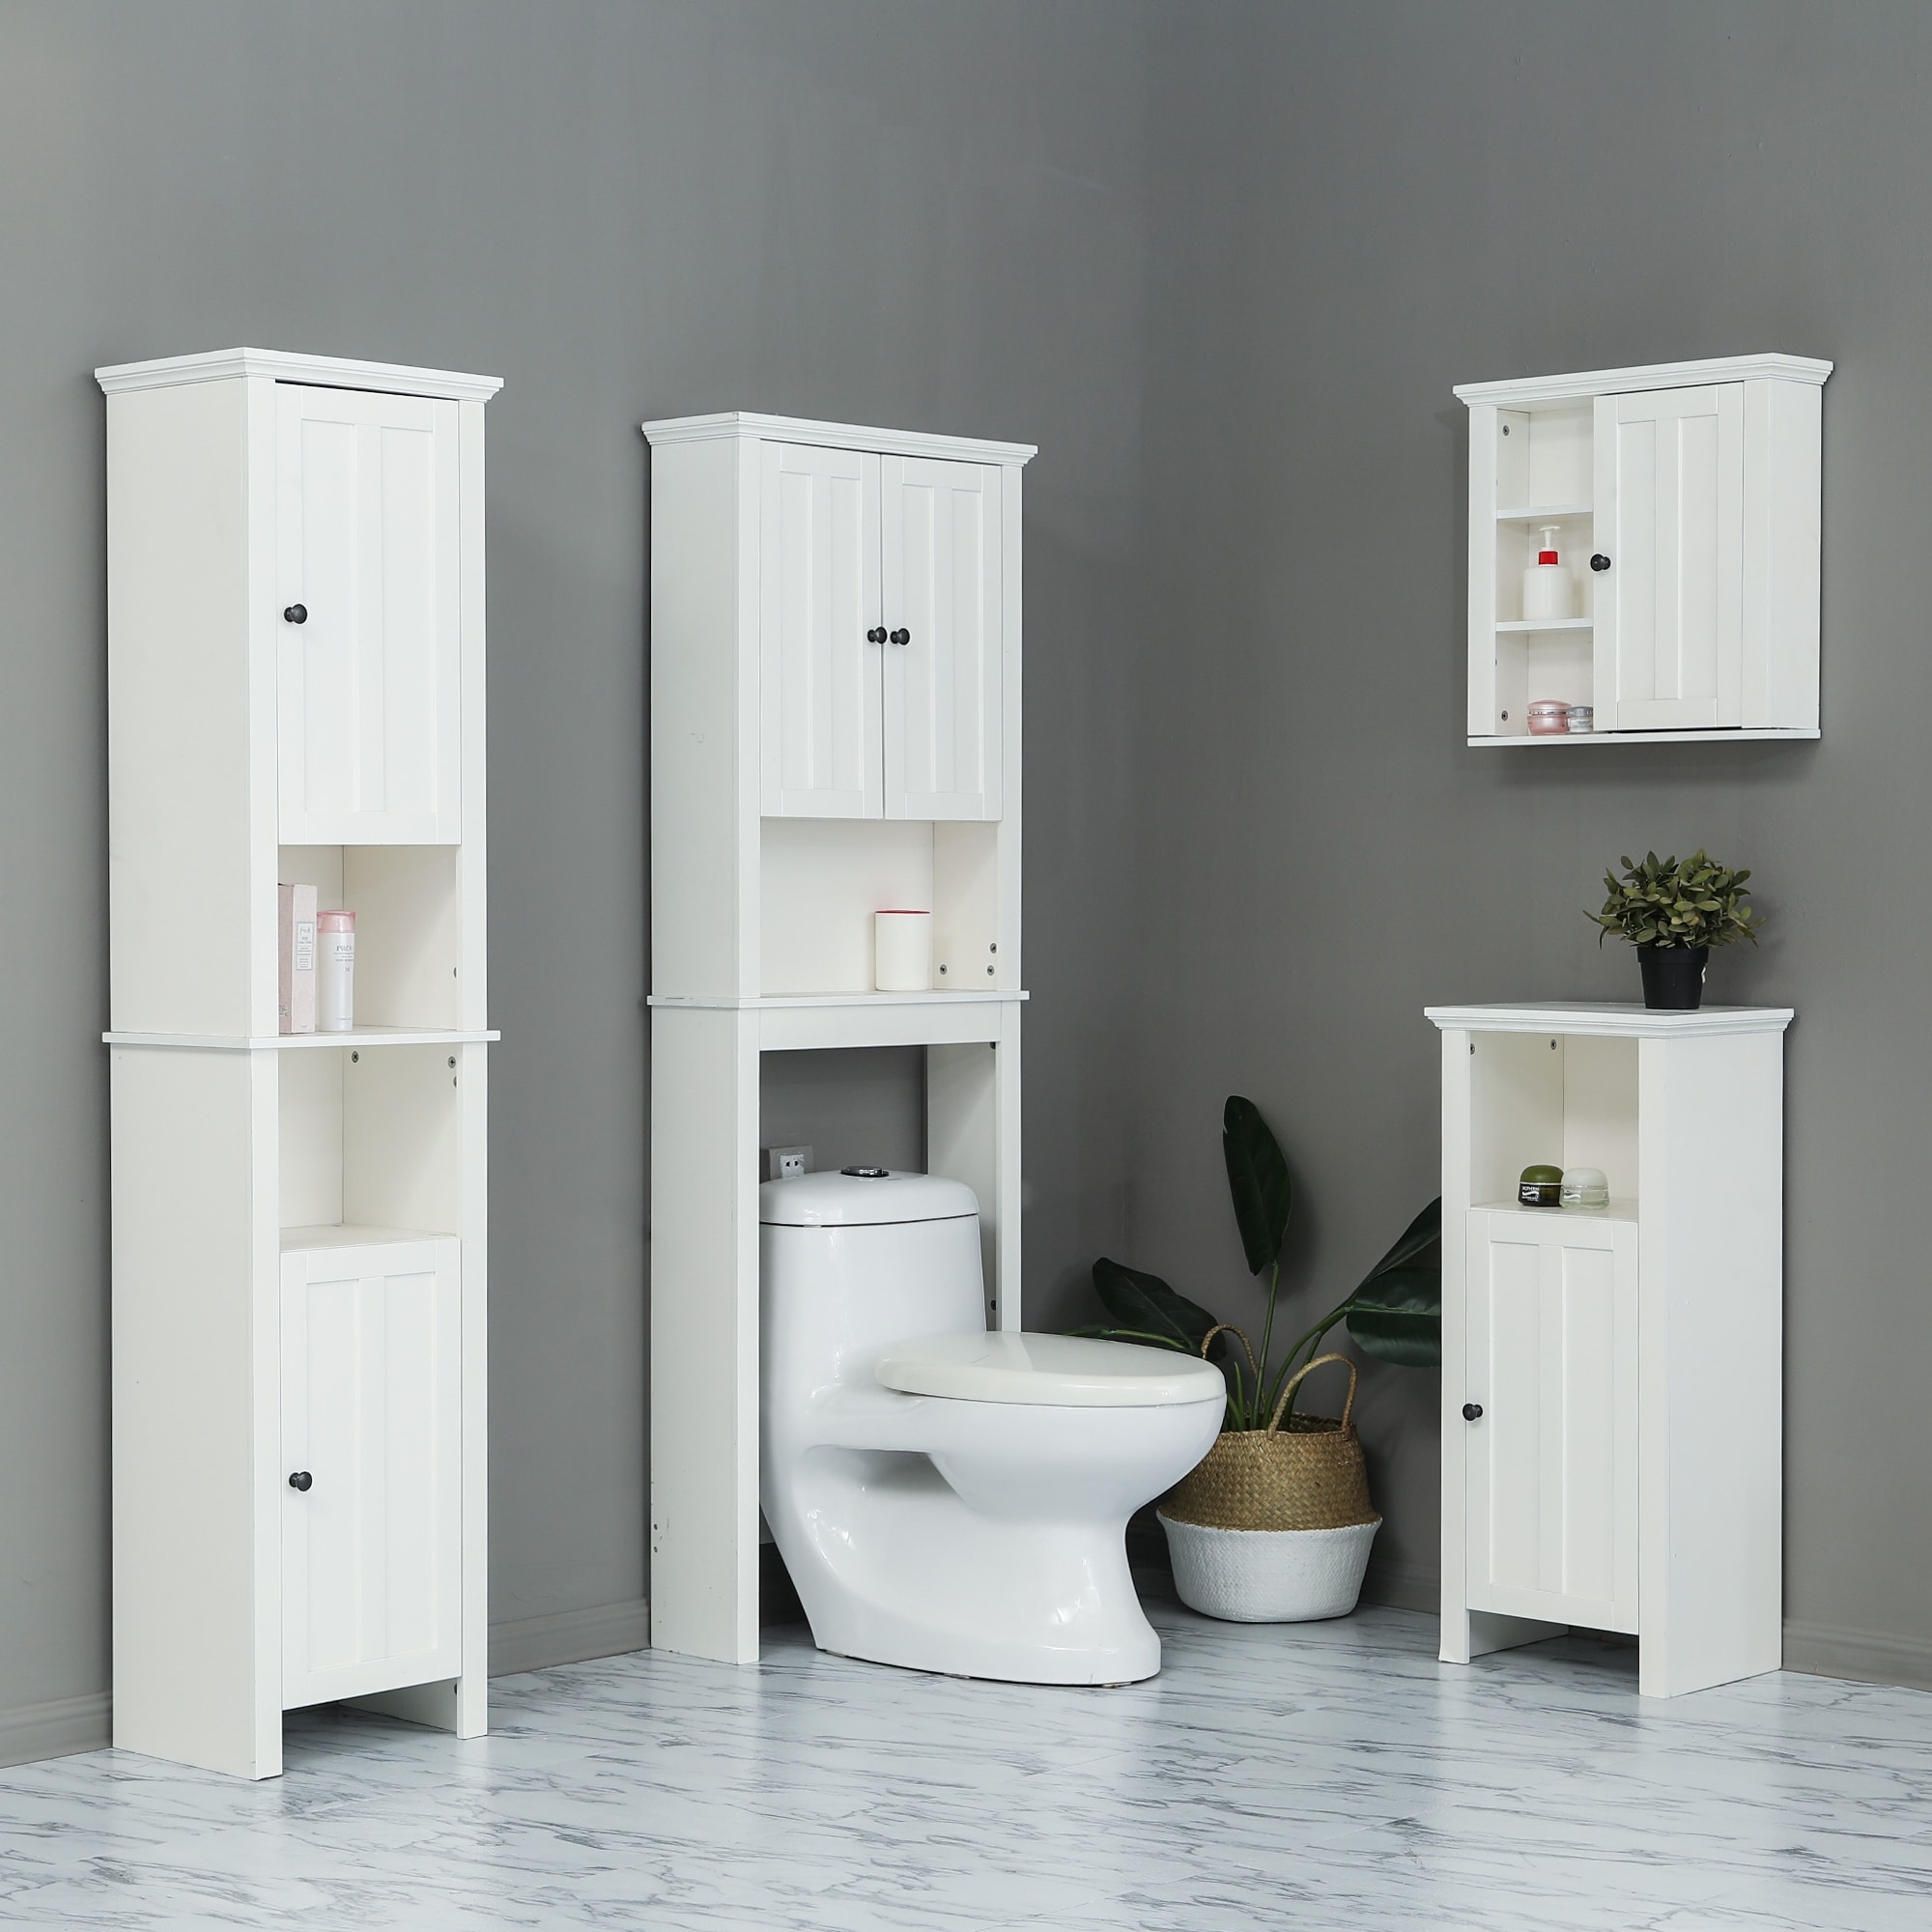 https://ak1.ostkcdn.com/images/products/is/images/direct/7caeec4aebe9e8ba46761d81535a8956e013d1e0/White-MDF-Wood-67-Inch-Tall-Tower-Bathroom-Linen-Cabinet.jpg